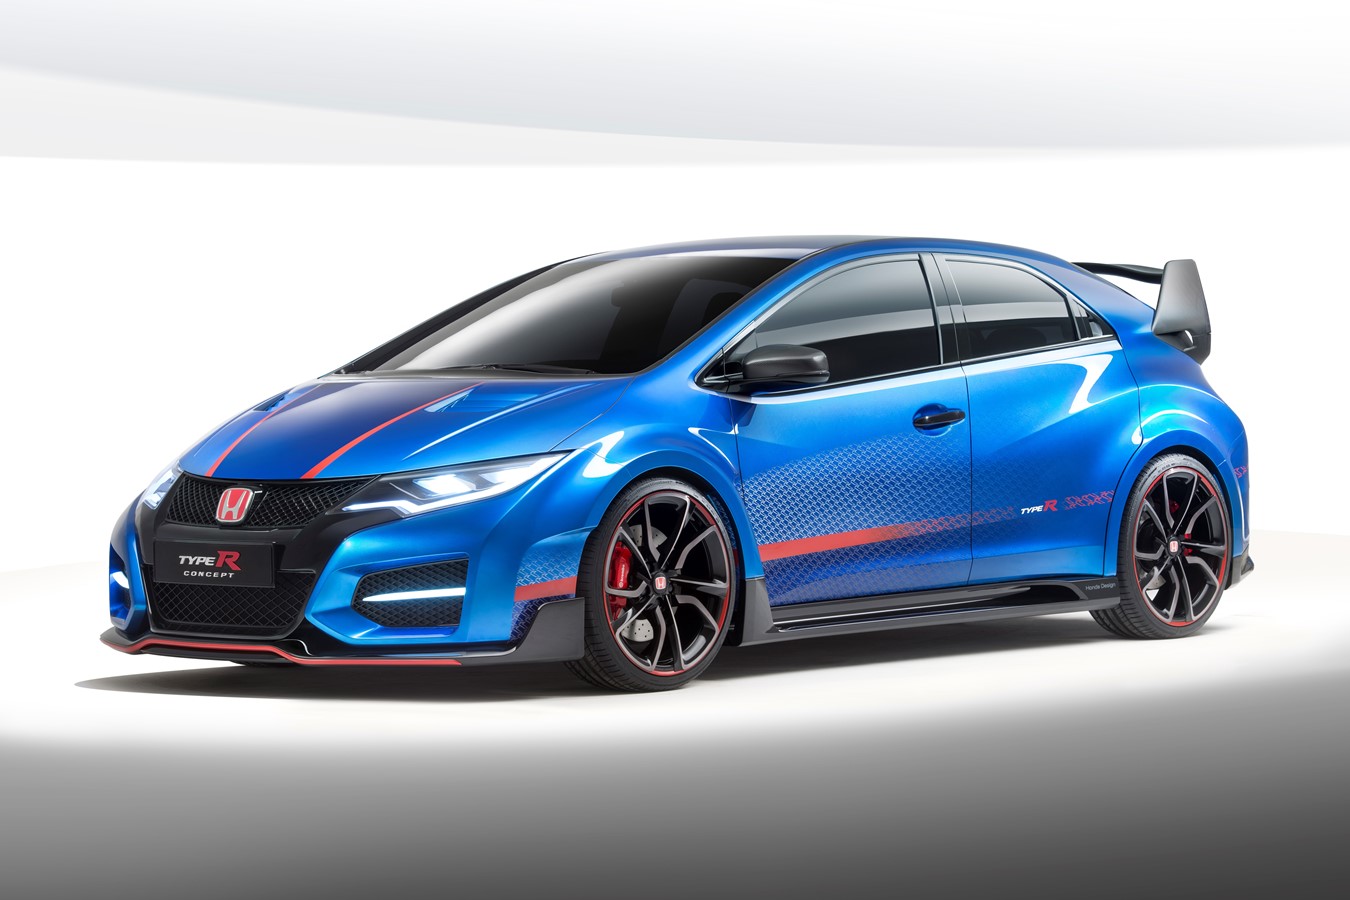 Allnew Honda Civic Type R unrivalled against the brand's iconic performance flagship models